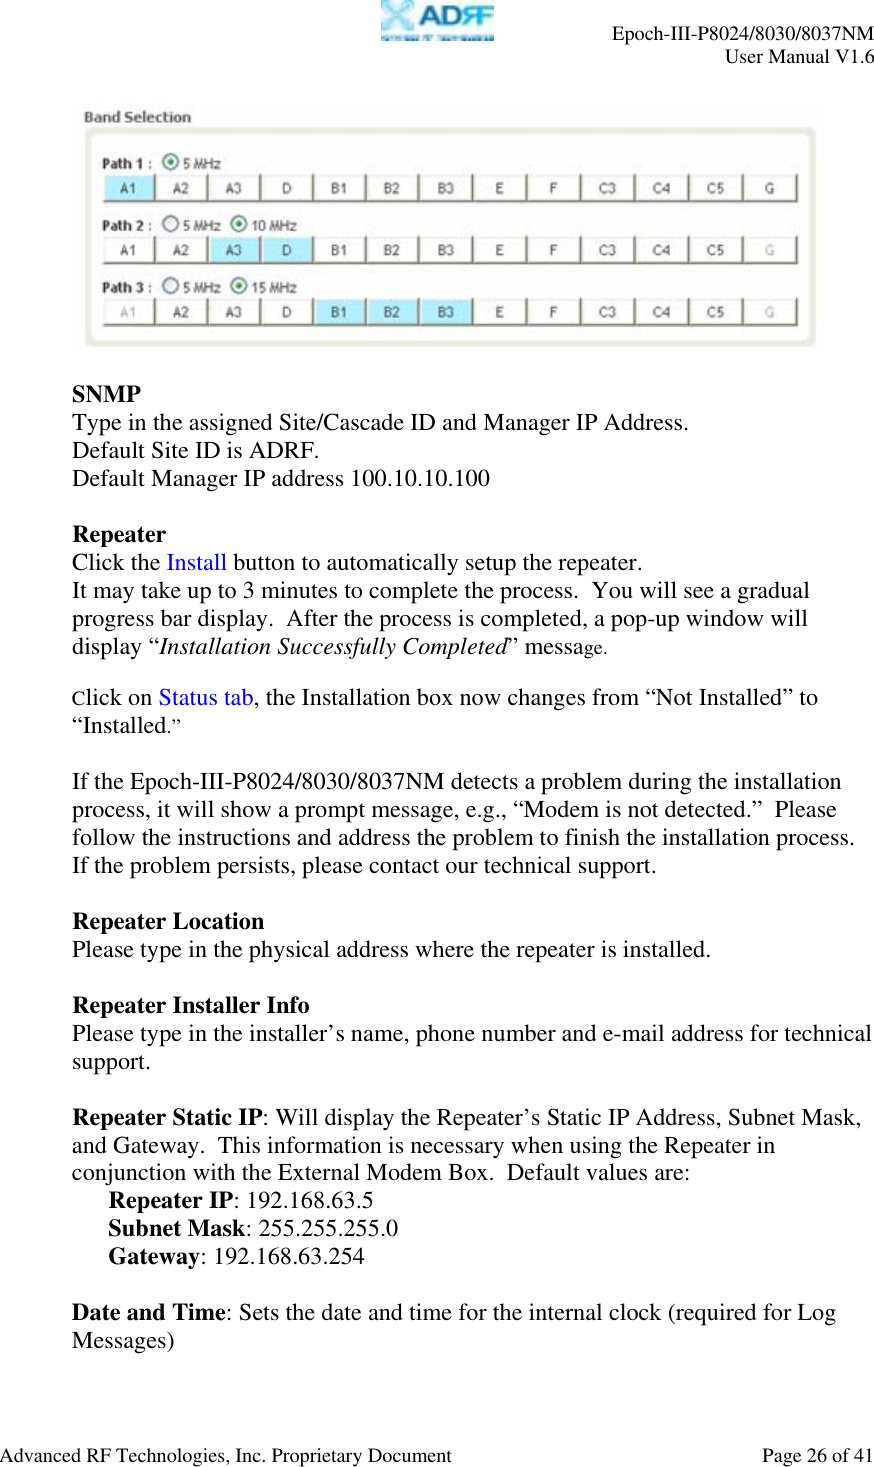     Epoch-III-P8024/8030/8037NM  User Manual V1.6  Advanced RF Technologies, Inc. Proprietary Document  Page 26 of 41    SNMP Type in the assigned Site/Cascade ID and Manager IP Address.  Default Site ID is ADRF. Default Manager IP address 100.10.10.100  Repeater Click the Install button to automatically setup the repeater.  It may take up to 3 minutes to complete the process.  You will see a gradual progress bar display.  After the process is completed, a pop-up window will display “Installation Successfully Completed” message.    Click on Status tab, the Installation box now changes from “Not Installed” to “Installed.”   If the Epoch-III-P8024/8030/8037NM detects a problem during the installation process, it will show a prompt message, e.g., “Modem is not detected.”  Please follow the instructions and address the problem to finish the installation process. If the problem persists, please contact our technical support.  Repeater Location Please type in the physical address where the repeater is installed.  Repeater Installer Info Please type in the installer’s name, phone number and e-mail address for technical support.  Repeater Static IP: Will display the Repeater’s Static IP Address, Subnet Mask, and Gateway.  This information is necessary when using the Repeater in conjunction with the External Modem Box.  Default values are: Repeater IP: 192.168.63.5 Subnet Mask: 255.255.255.0 Gateway: 192.168.63.254  Date and Time: Sets the date and time for the internal clock (required for Log Messages)  